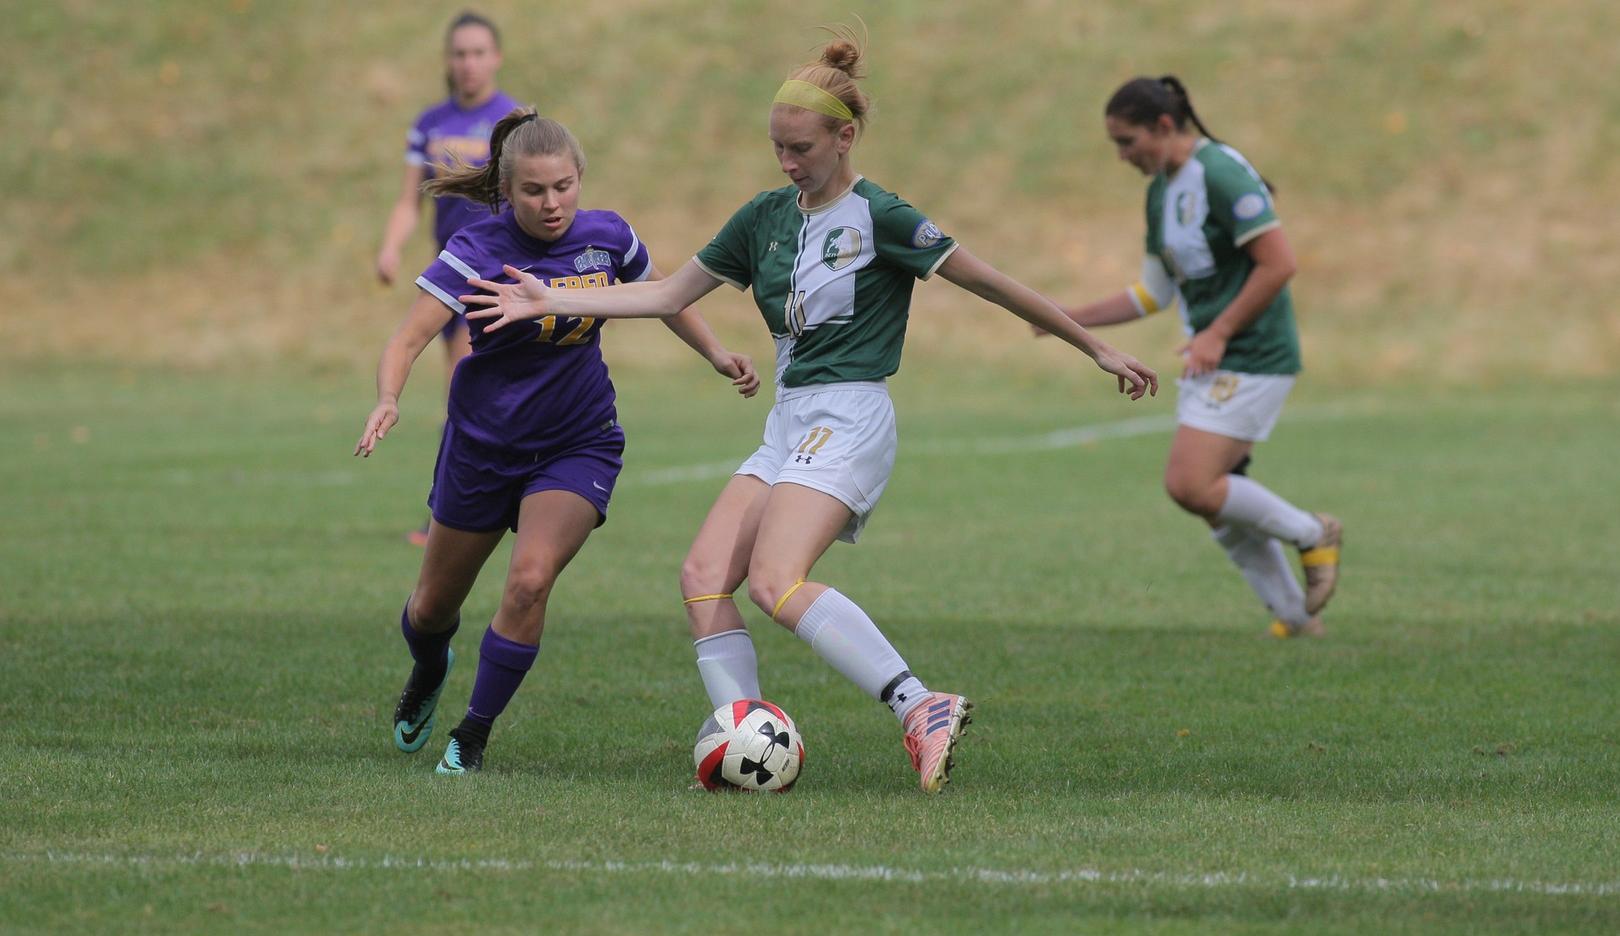 Women's soccer looks for continued improvement under Latifi